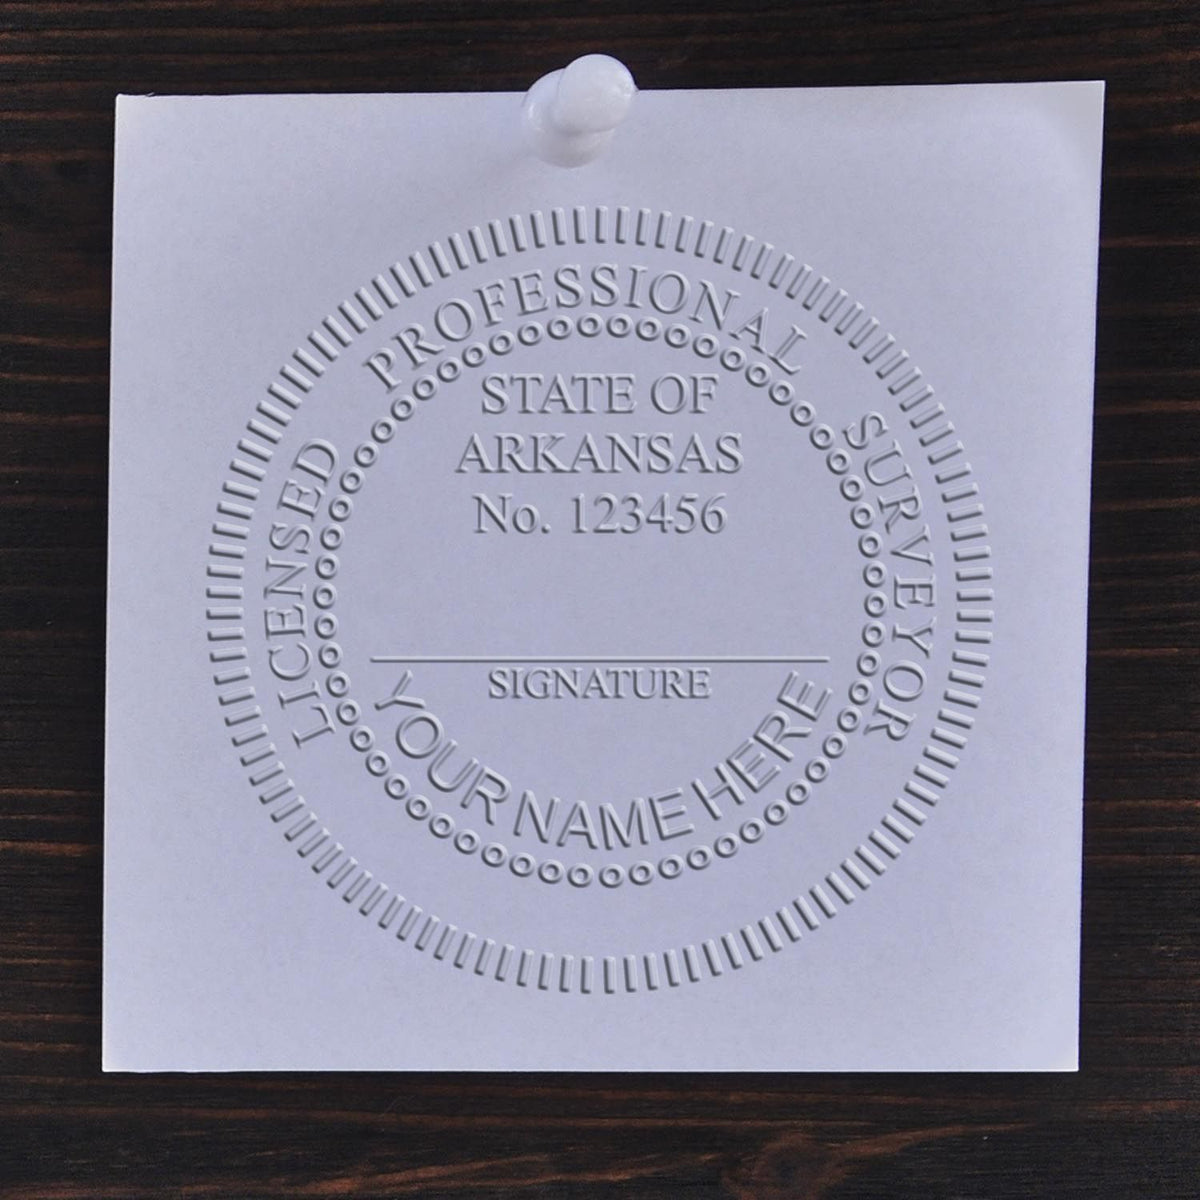 An alternative view of the Heavy Duty Cast Iron Arkansas Land Surveyor Seal Embosser stamped on a sheet of paper showing the image in use